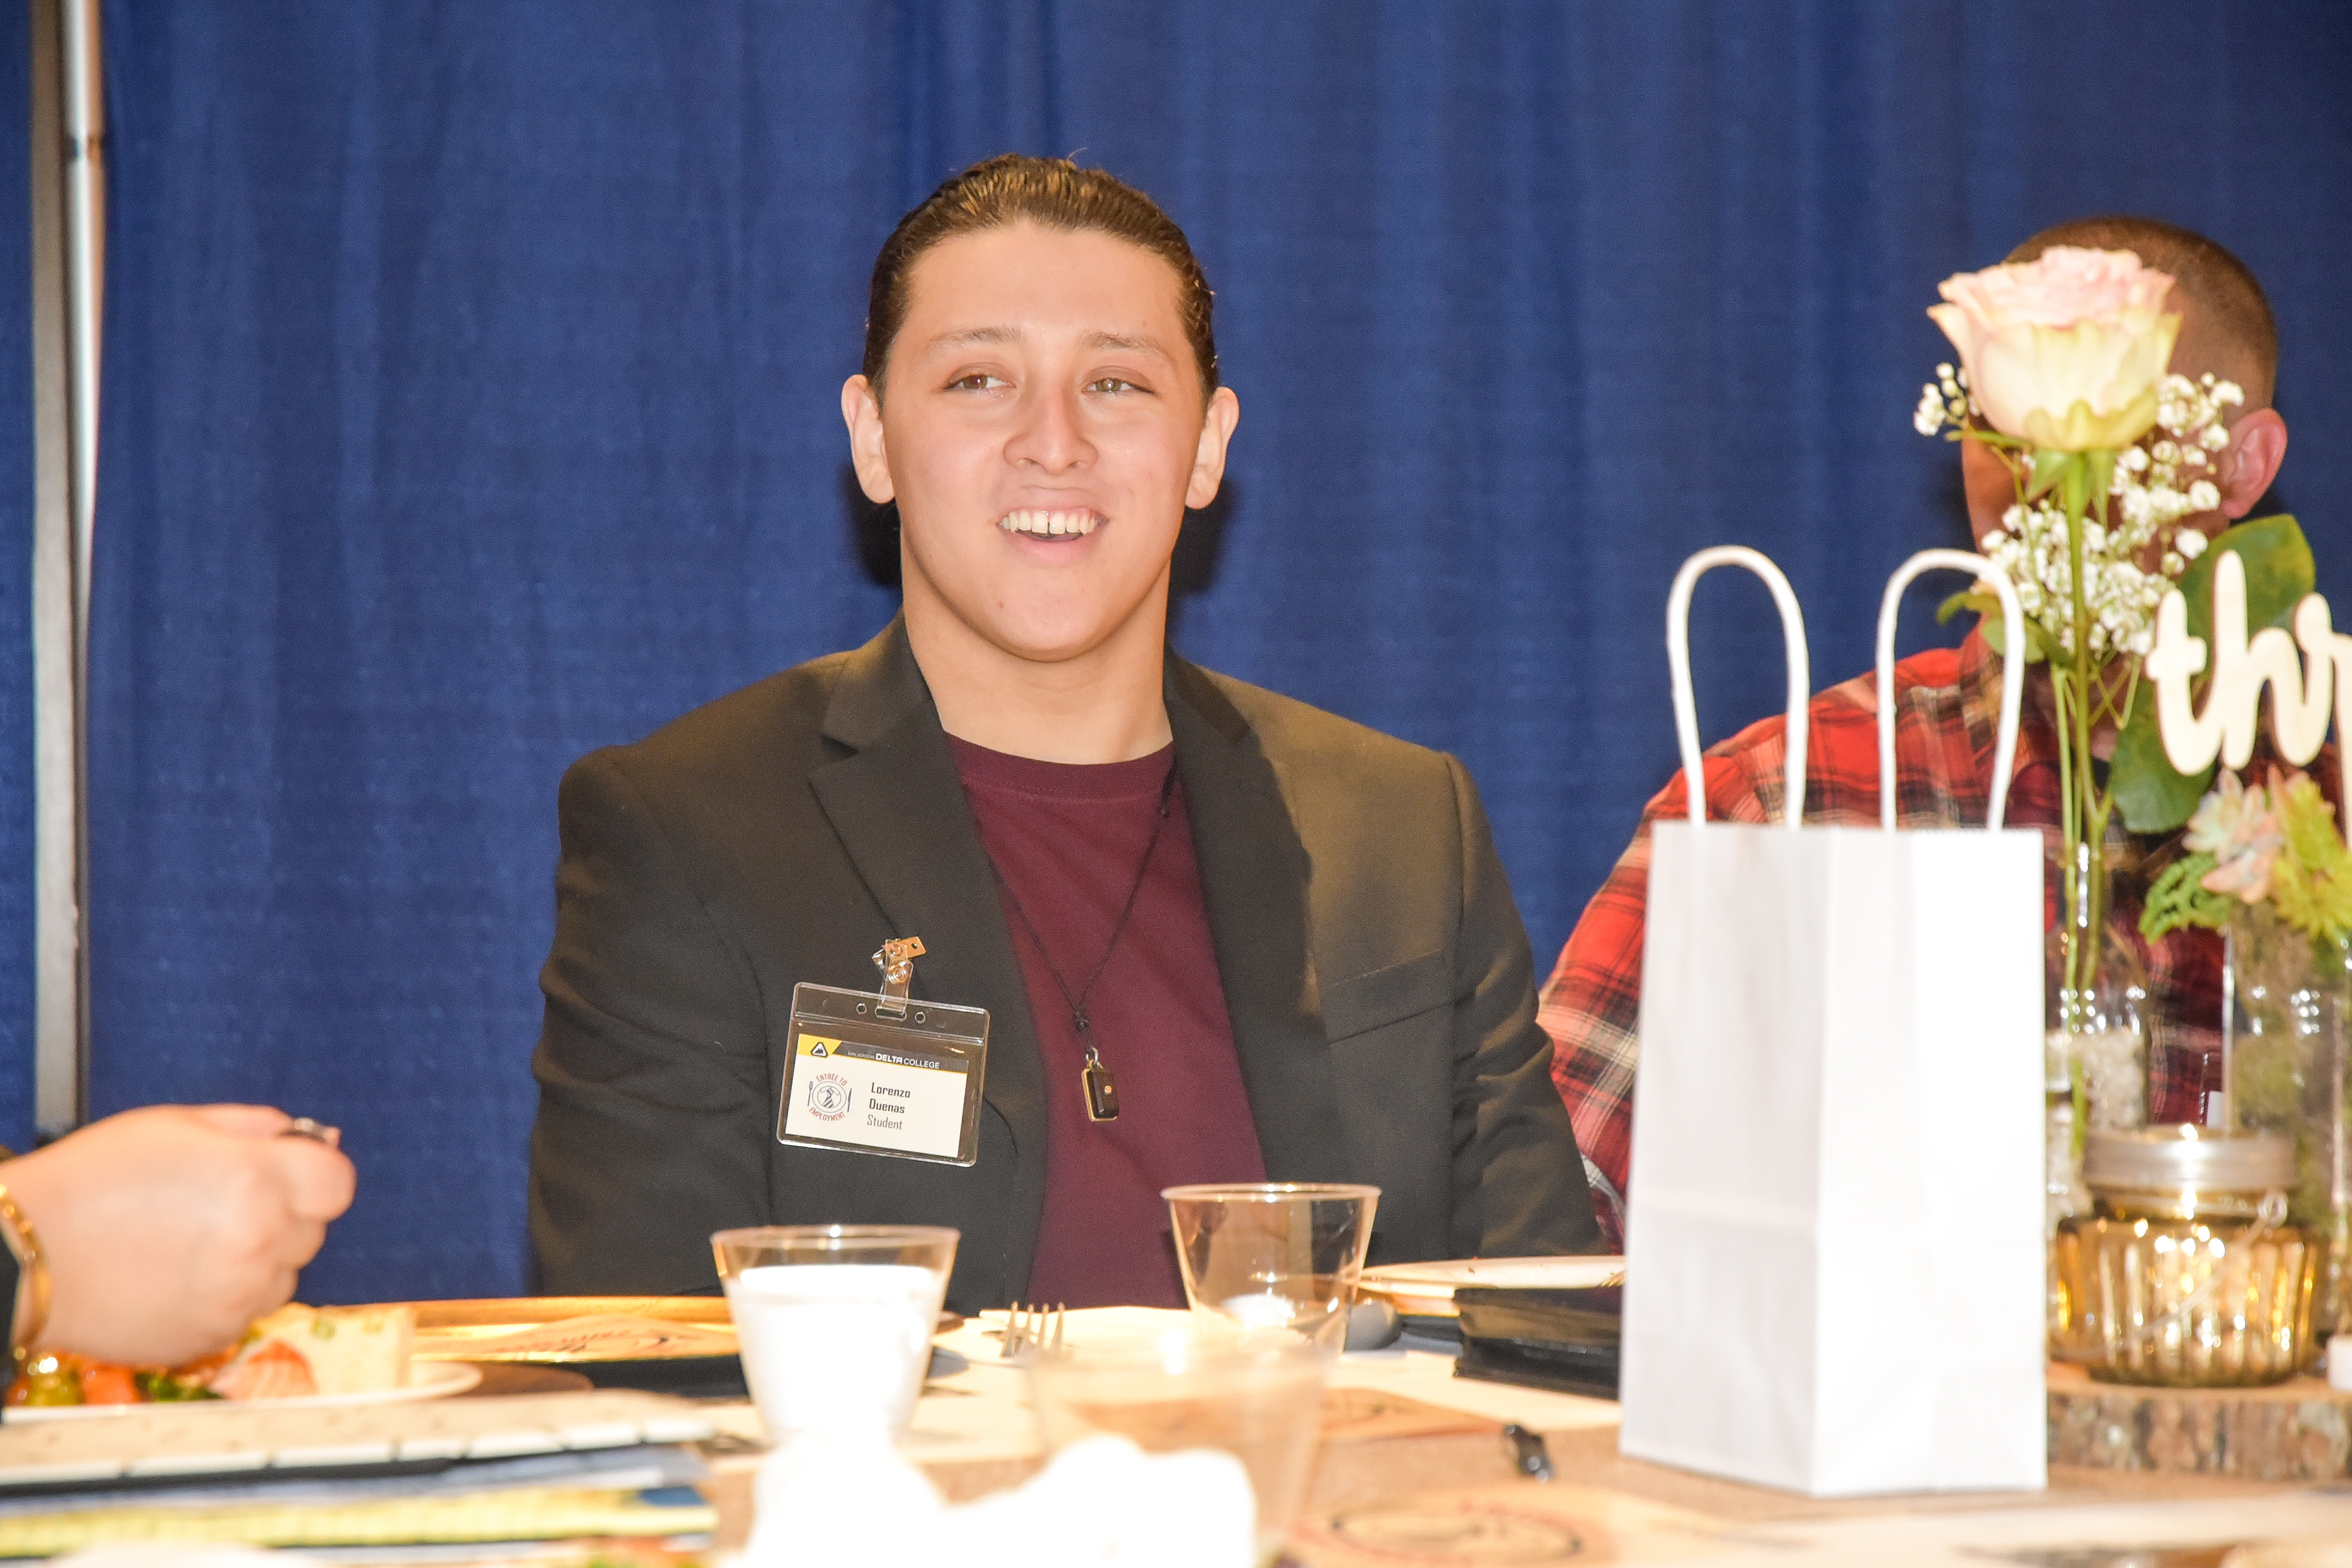 Lorenzo Duenas hopes to become a welder. He attended San Joaquin Delta College's recent Entree to Employment event.